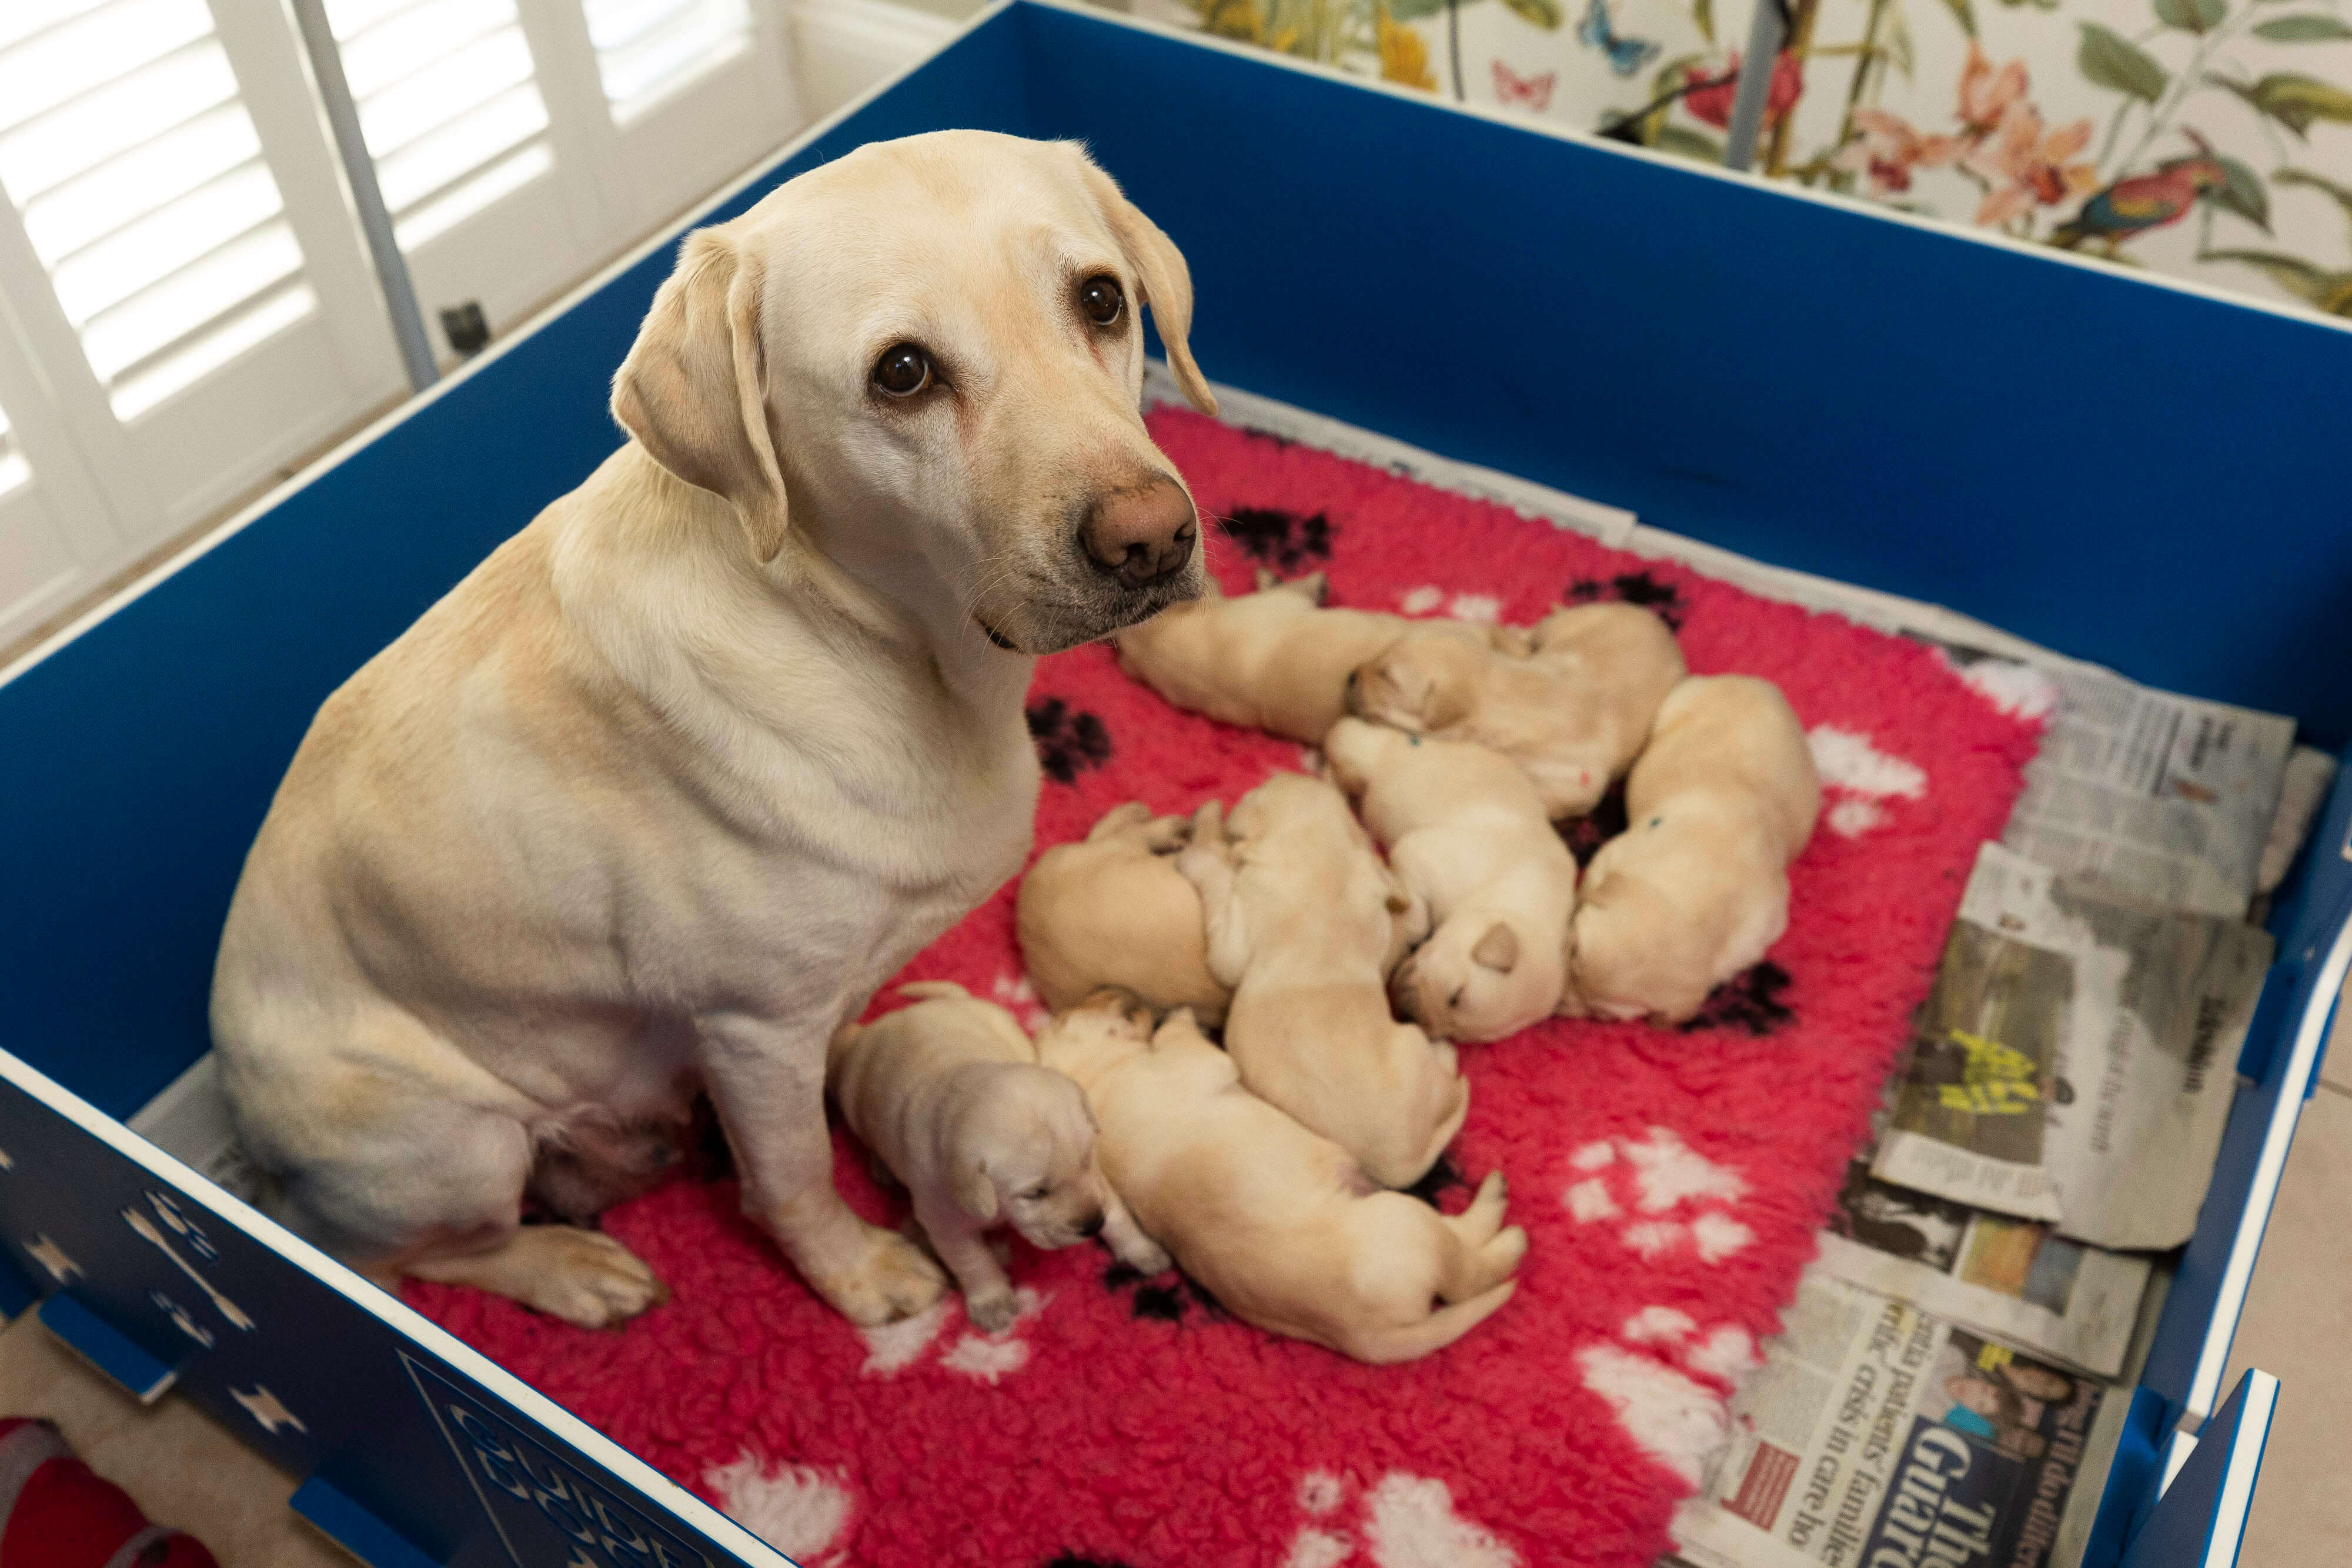 Guide dog mum Sylvia and her litter of eight yellow Labrador puppies at three-weeks-old. The puppies sleep piled up on a red fleece blanket in a blue whelping box, as Sylvia sits and looks up at the camera.